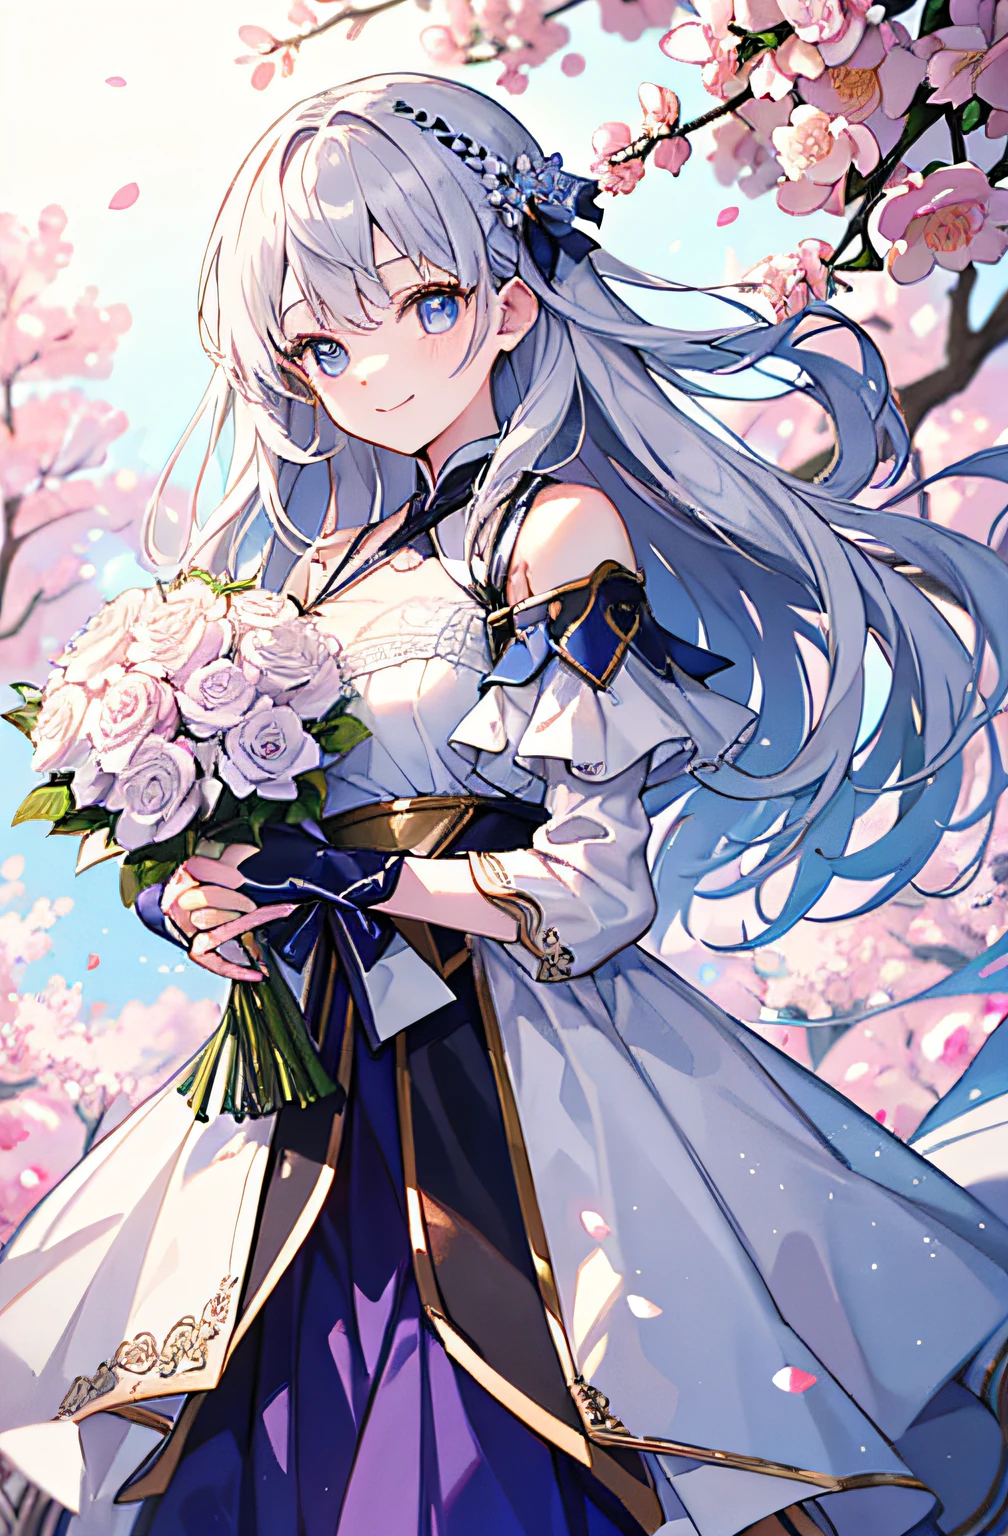 (tmasterpiece、top-quality、illustratio、Extremely high quality、high-level image quality、Extremely sensitive writing)Girl with long silver hair standing in beautiful flowery garden、A slight smile、She has a large bouquet、Cute national costume style dress，There are ruffles on the shoulders、Hair fluttering in the wind